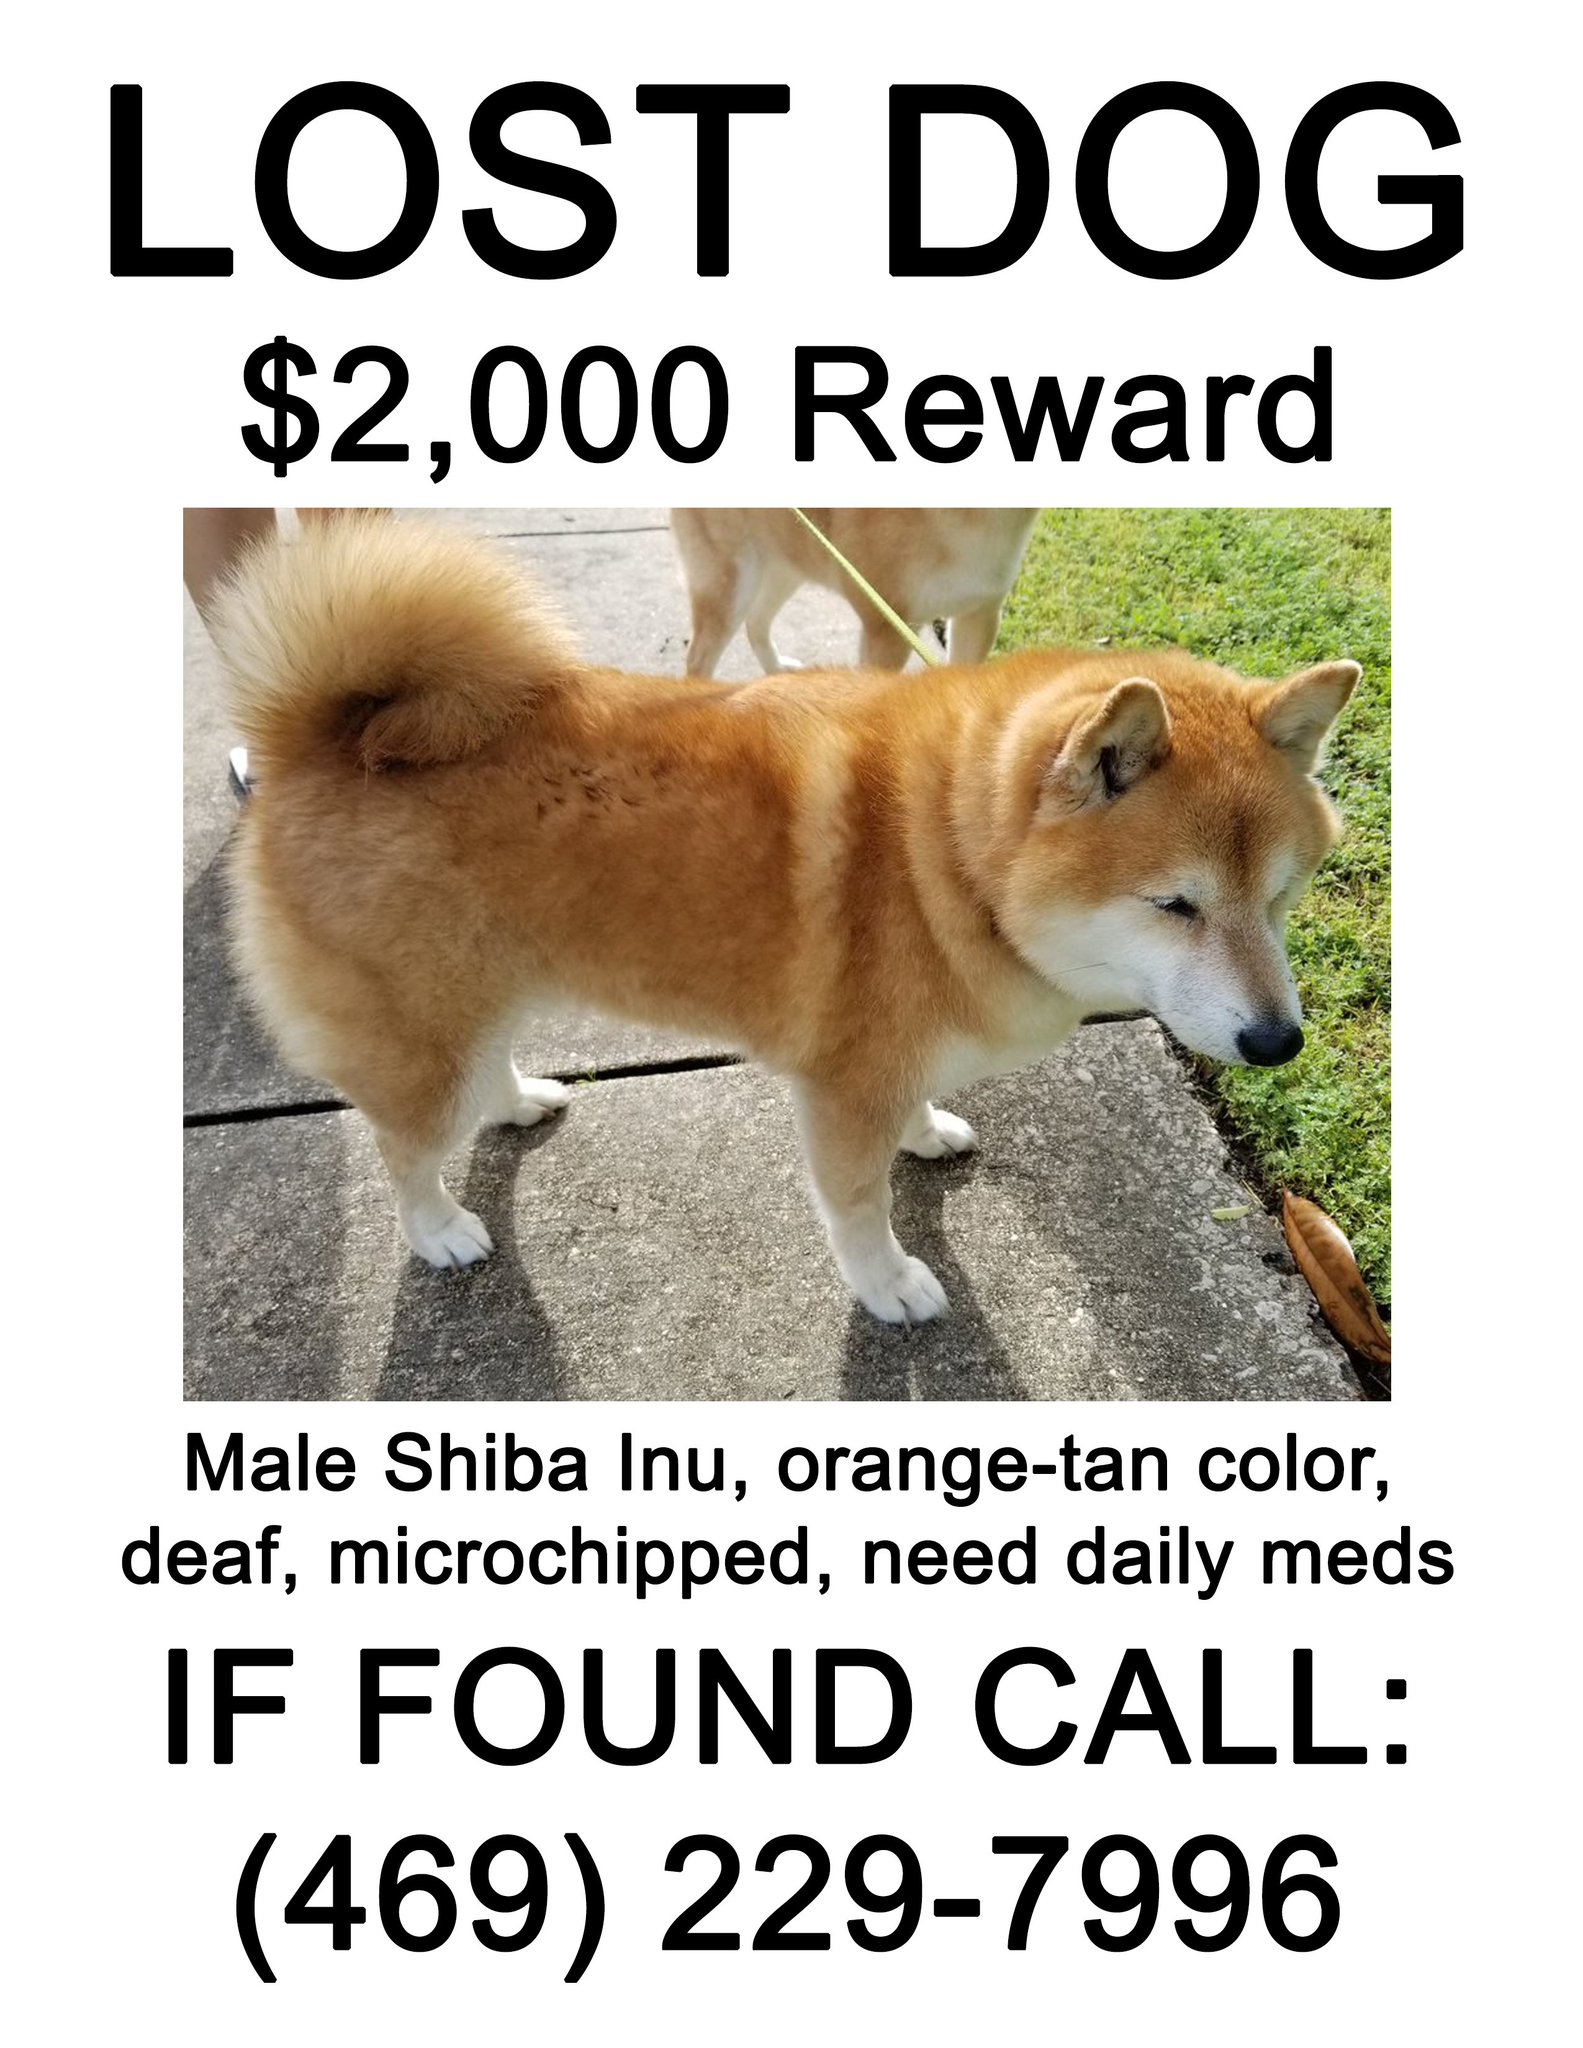 Drift0r On Twitter The Dog Is A Red Colored Neutered Male Shiba